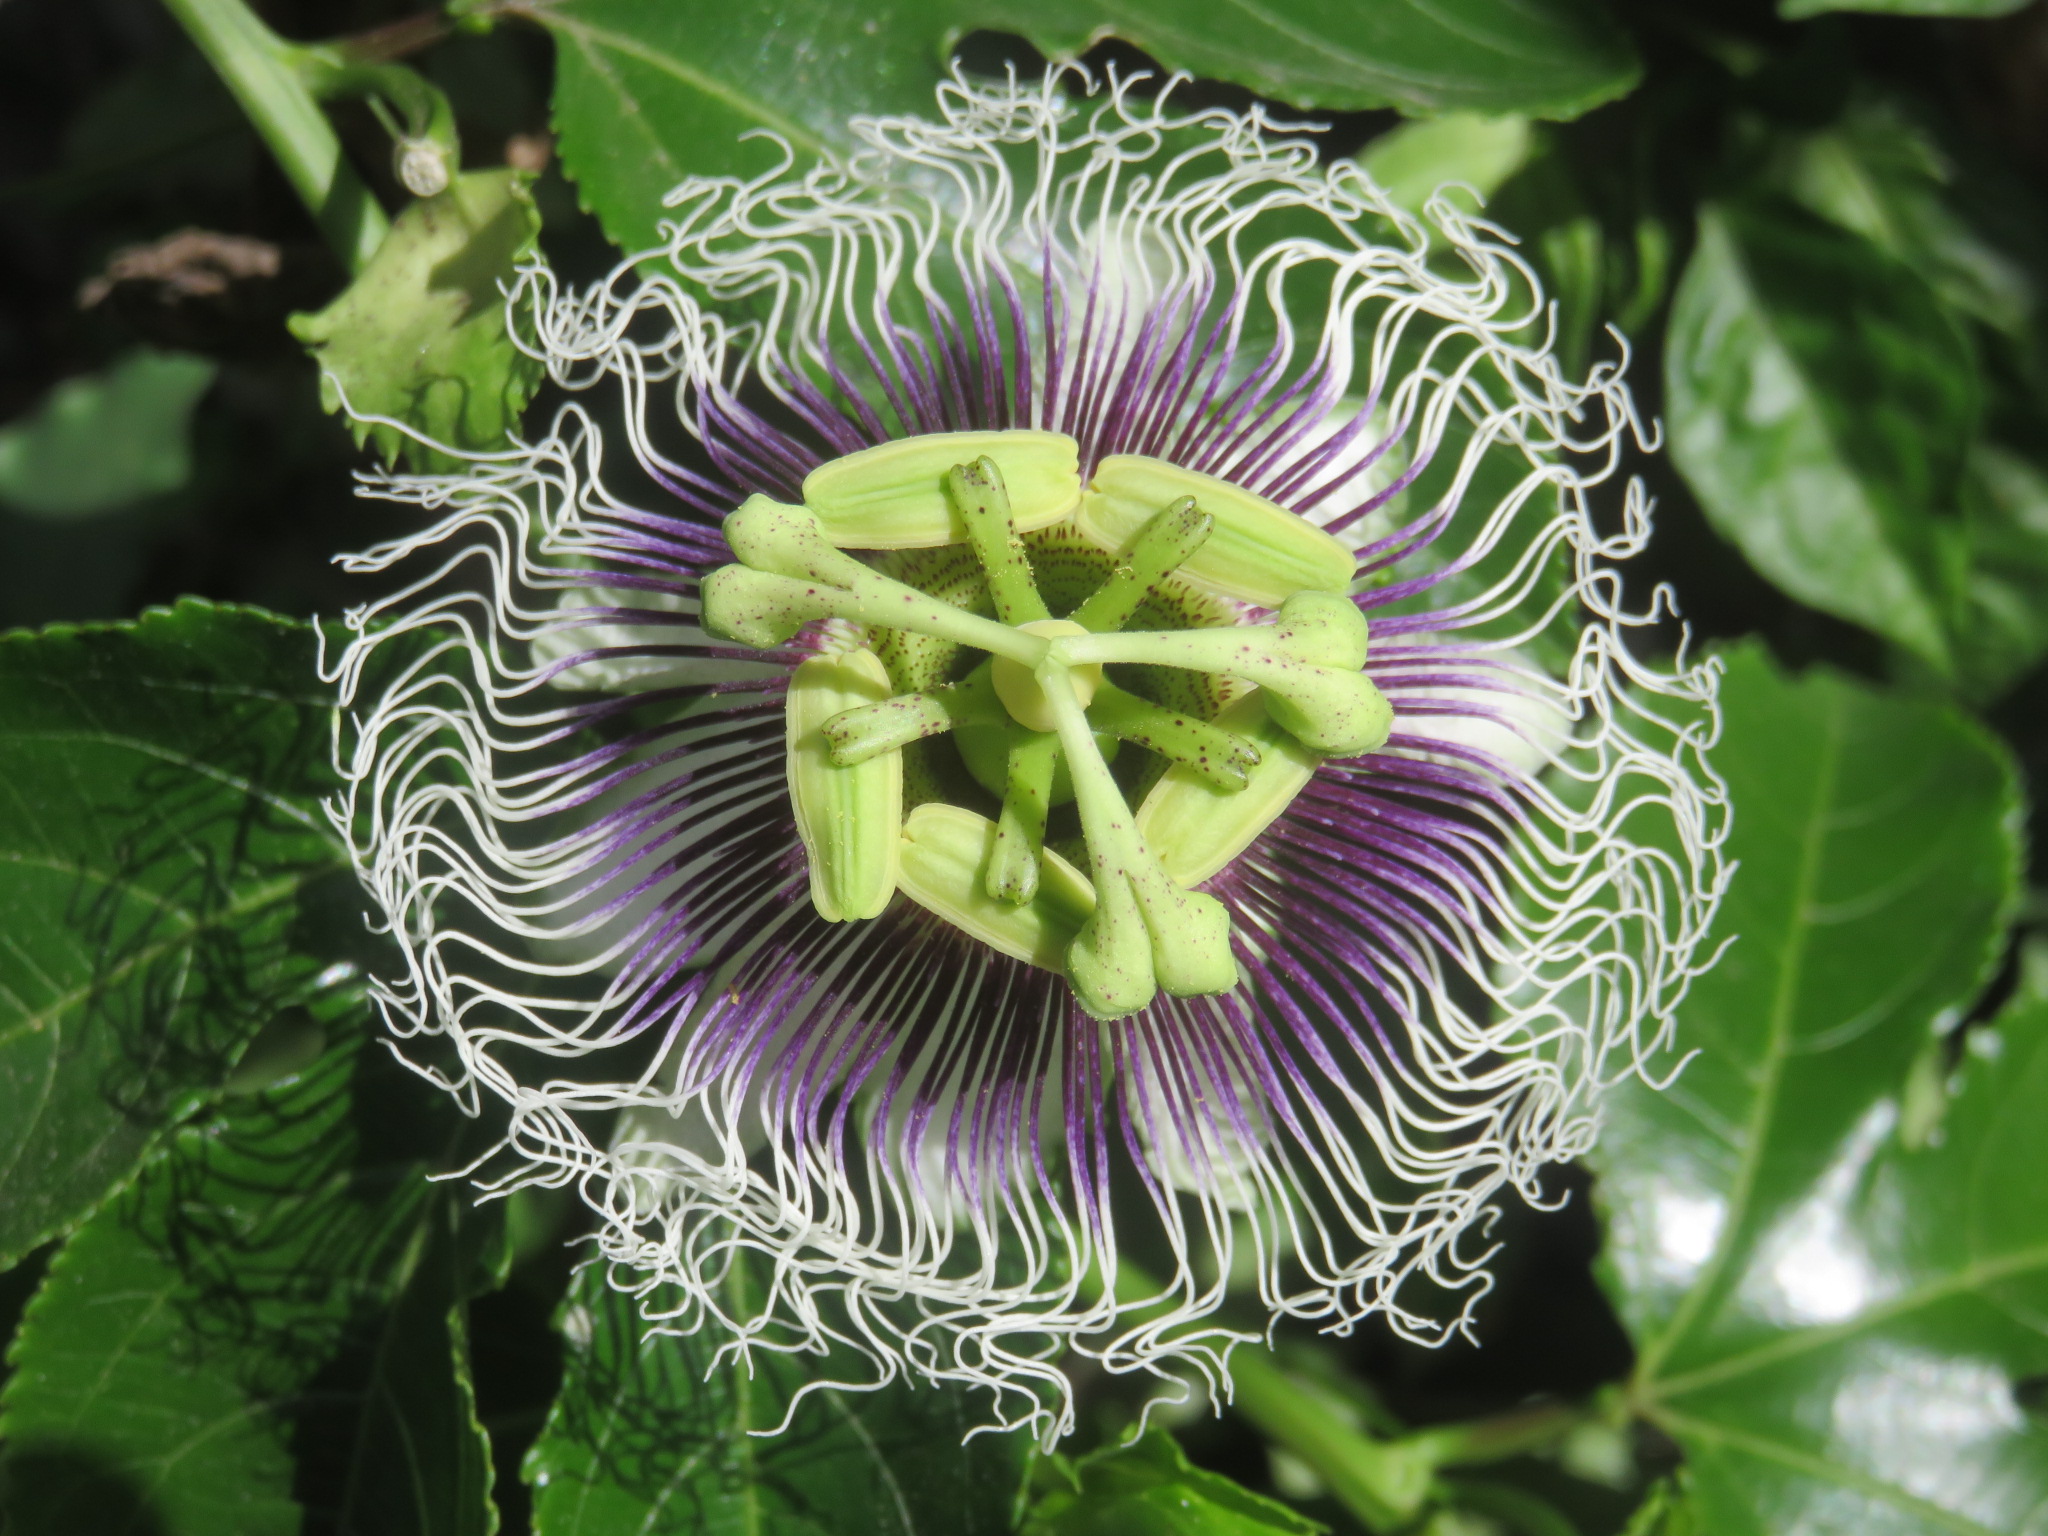 This flower symbolized Christ's passion to Jesuit missionaries in Brazil